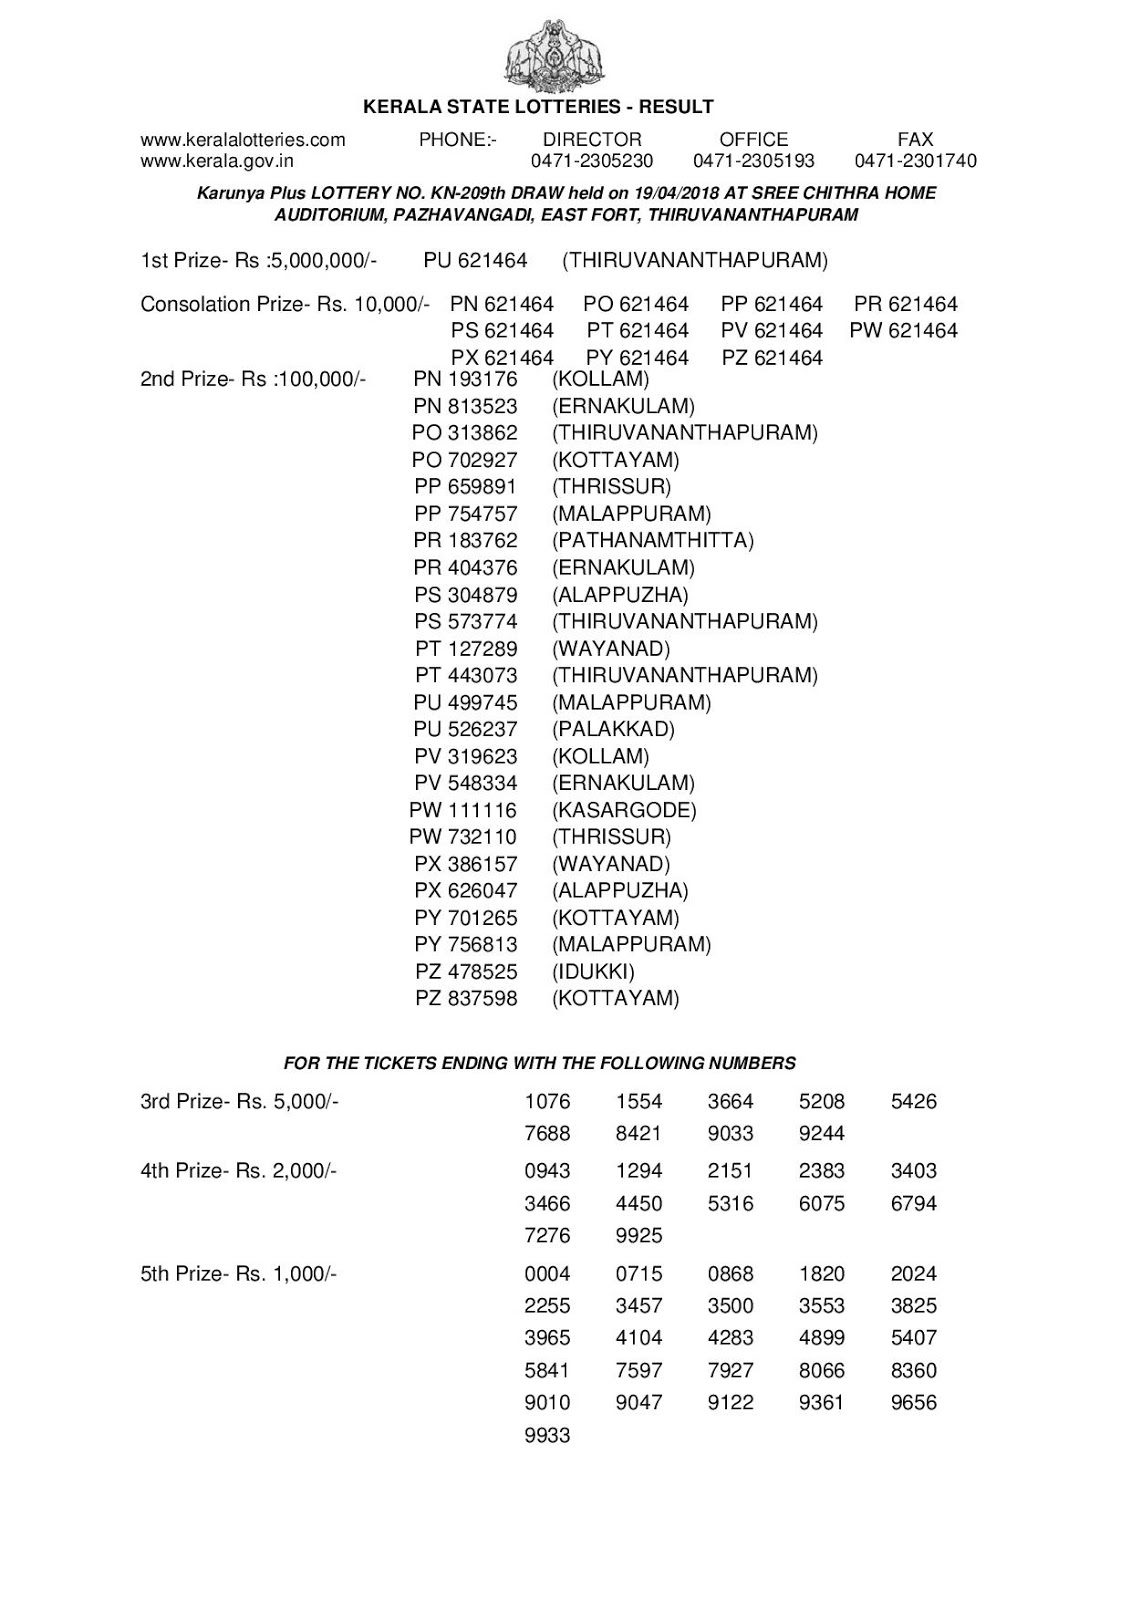 Kerala Lottery Result Today 19.04.2018 Karunya Plus KN-209 Lottery Results Official PDF